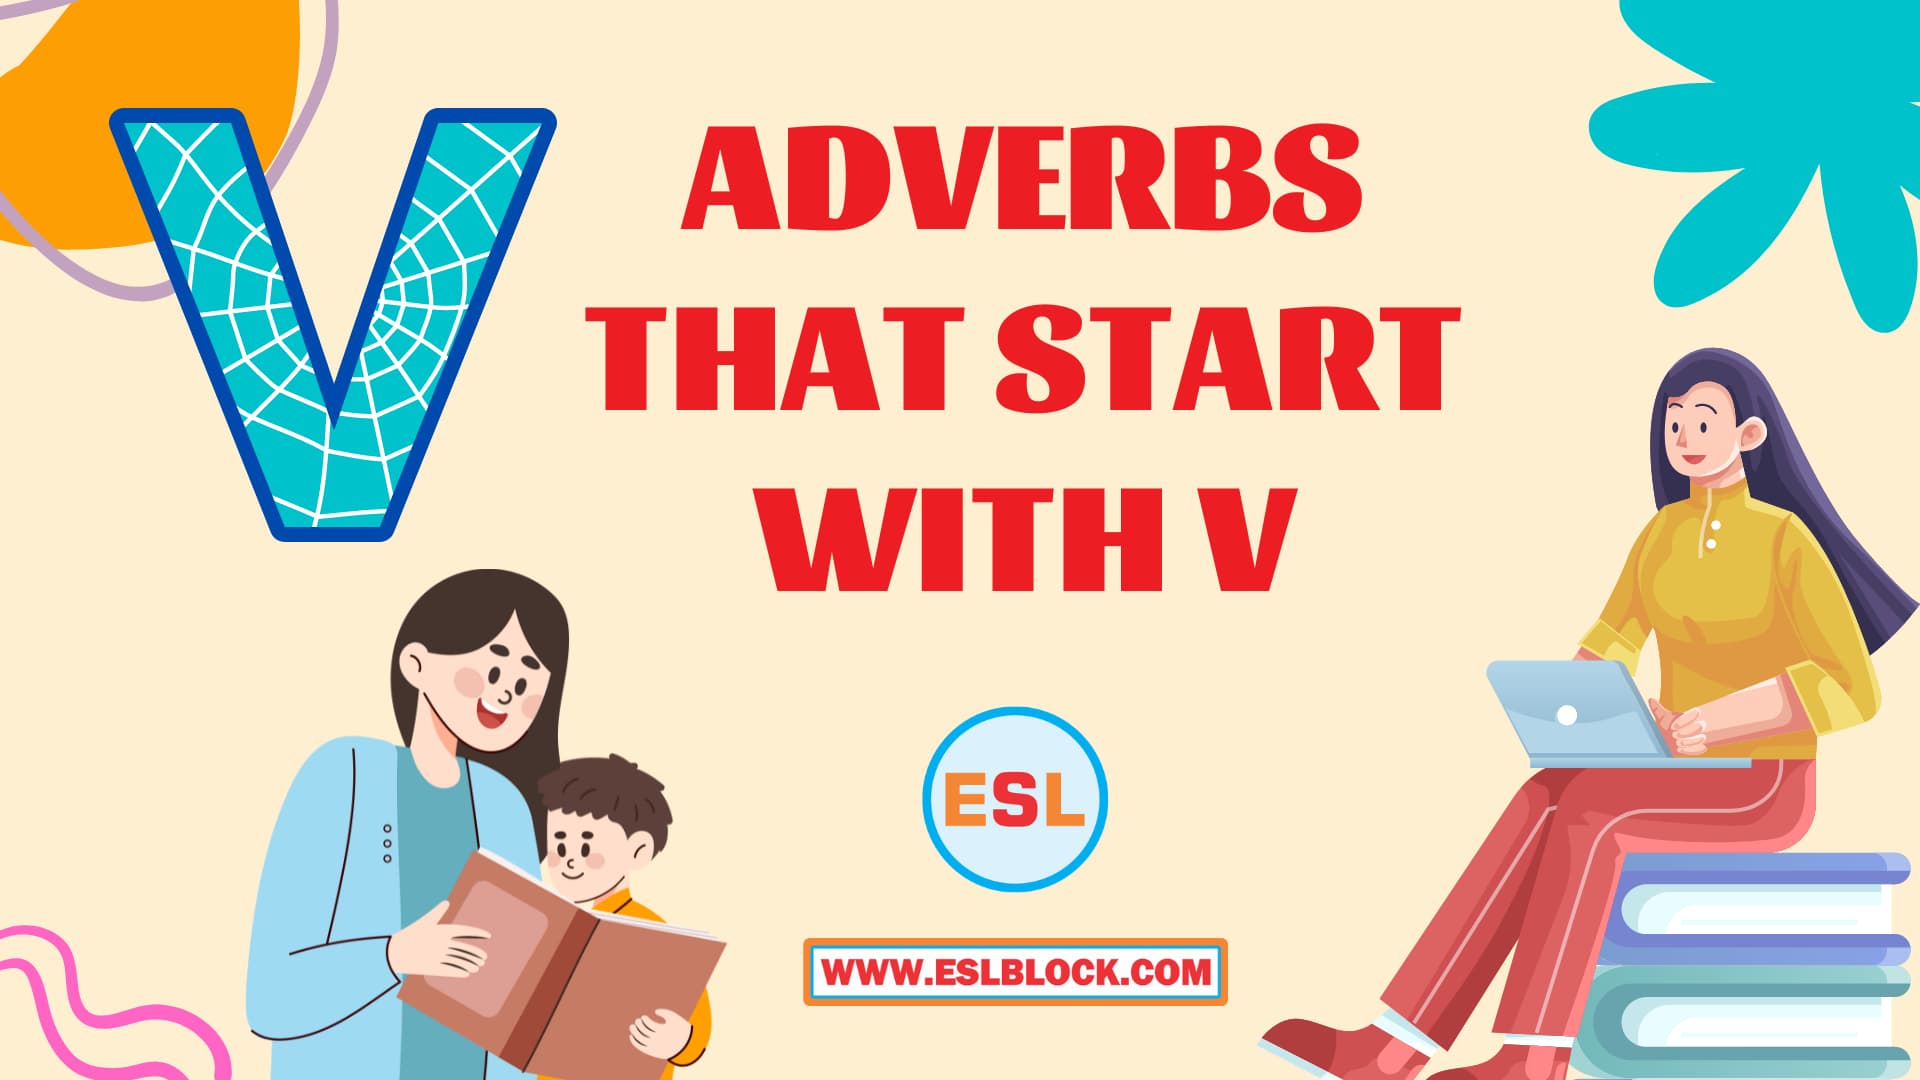 100 Example Sentences Using Adverbs, 4 Letter Adverbs That Start with V, 4 Letter Words, 5 Letter Adverbs That Start with V, 5 Letter Words, 6 Letter Adverbs That Start with V, 6 Letter Words, A to Z Adverbs, AA Adverbs, Adverb vocabulary words, Adverbs, Adverbs That Start with V, Adverbs with Example Sentences, All Adverbs, Types of Adverbs, Types of Adverbs with Example Sentences, Vocabulary, What are Adverbs, What are the types of Adverbs, Words That with V